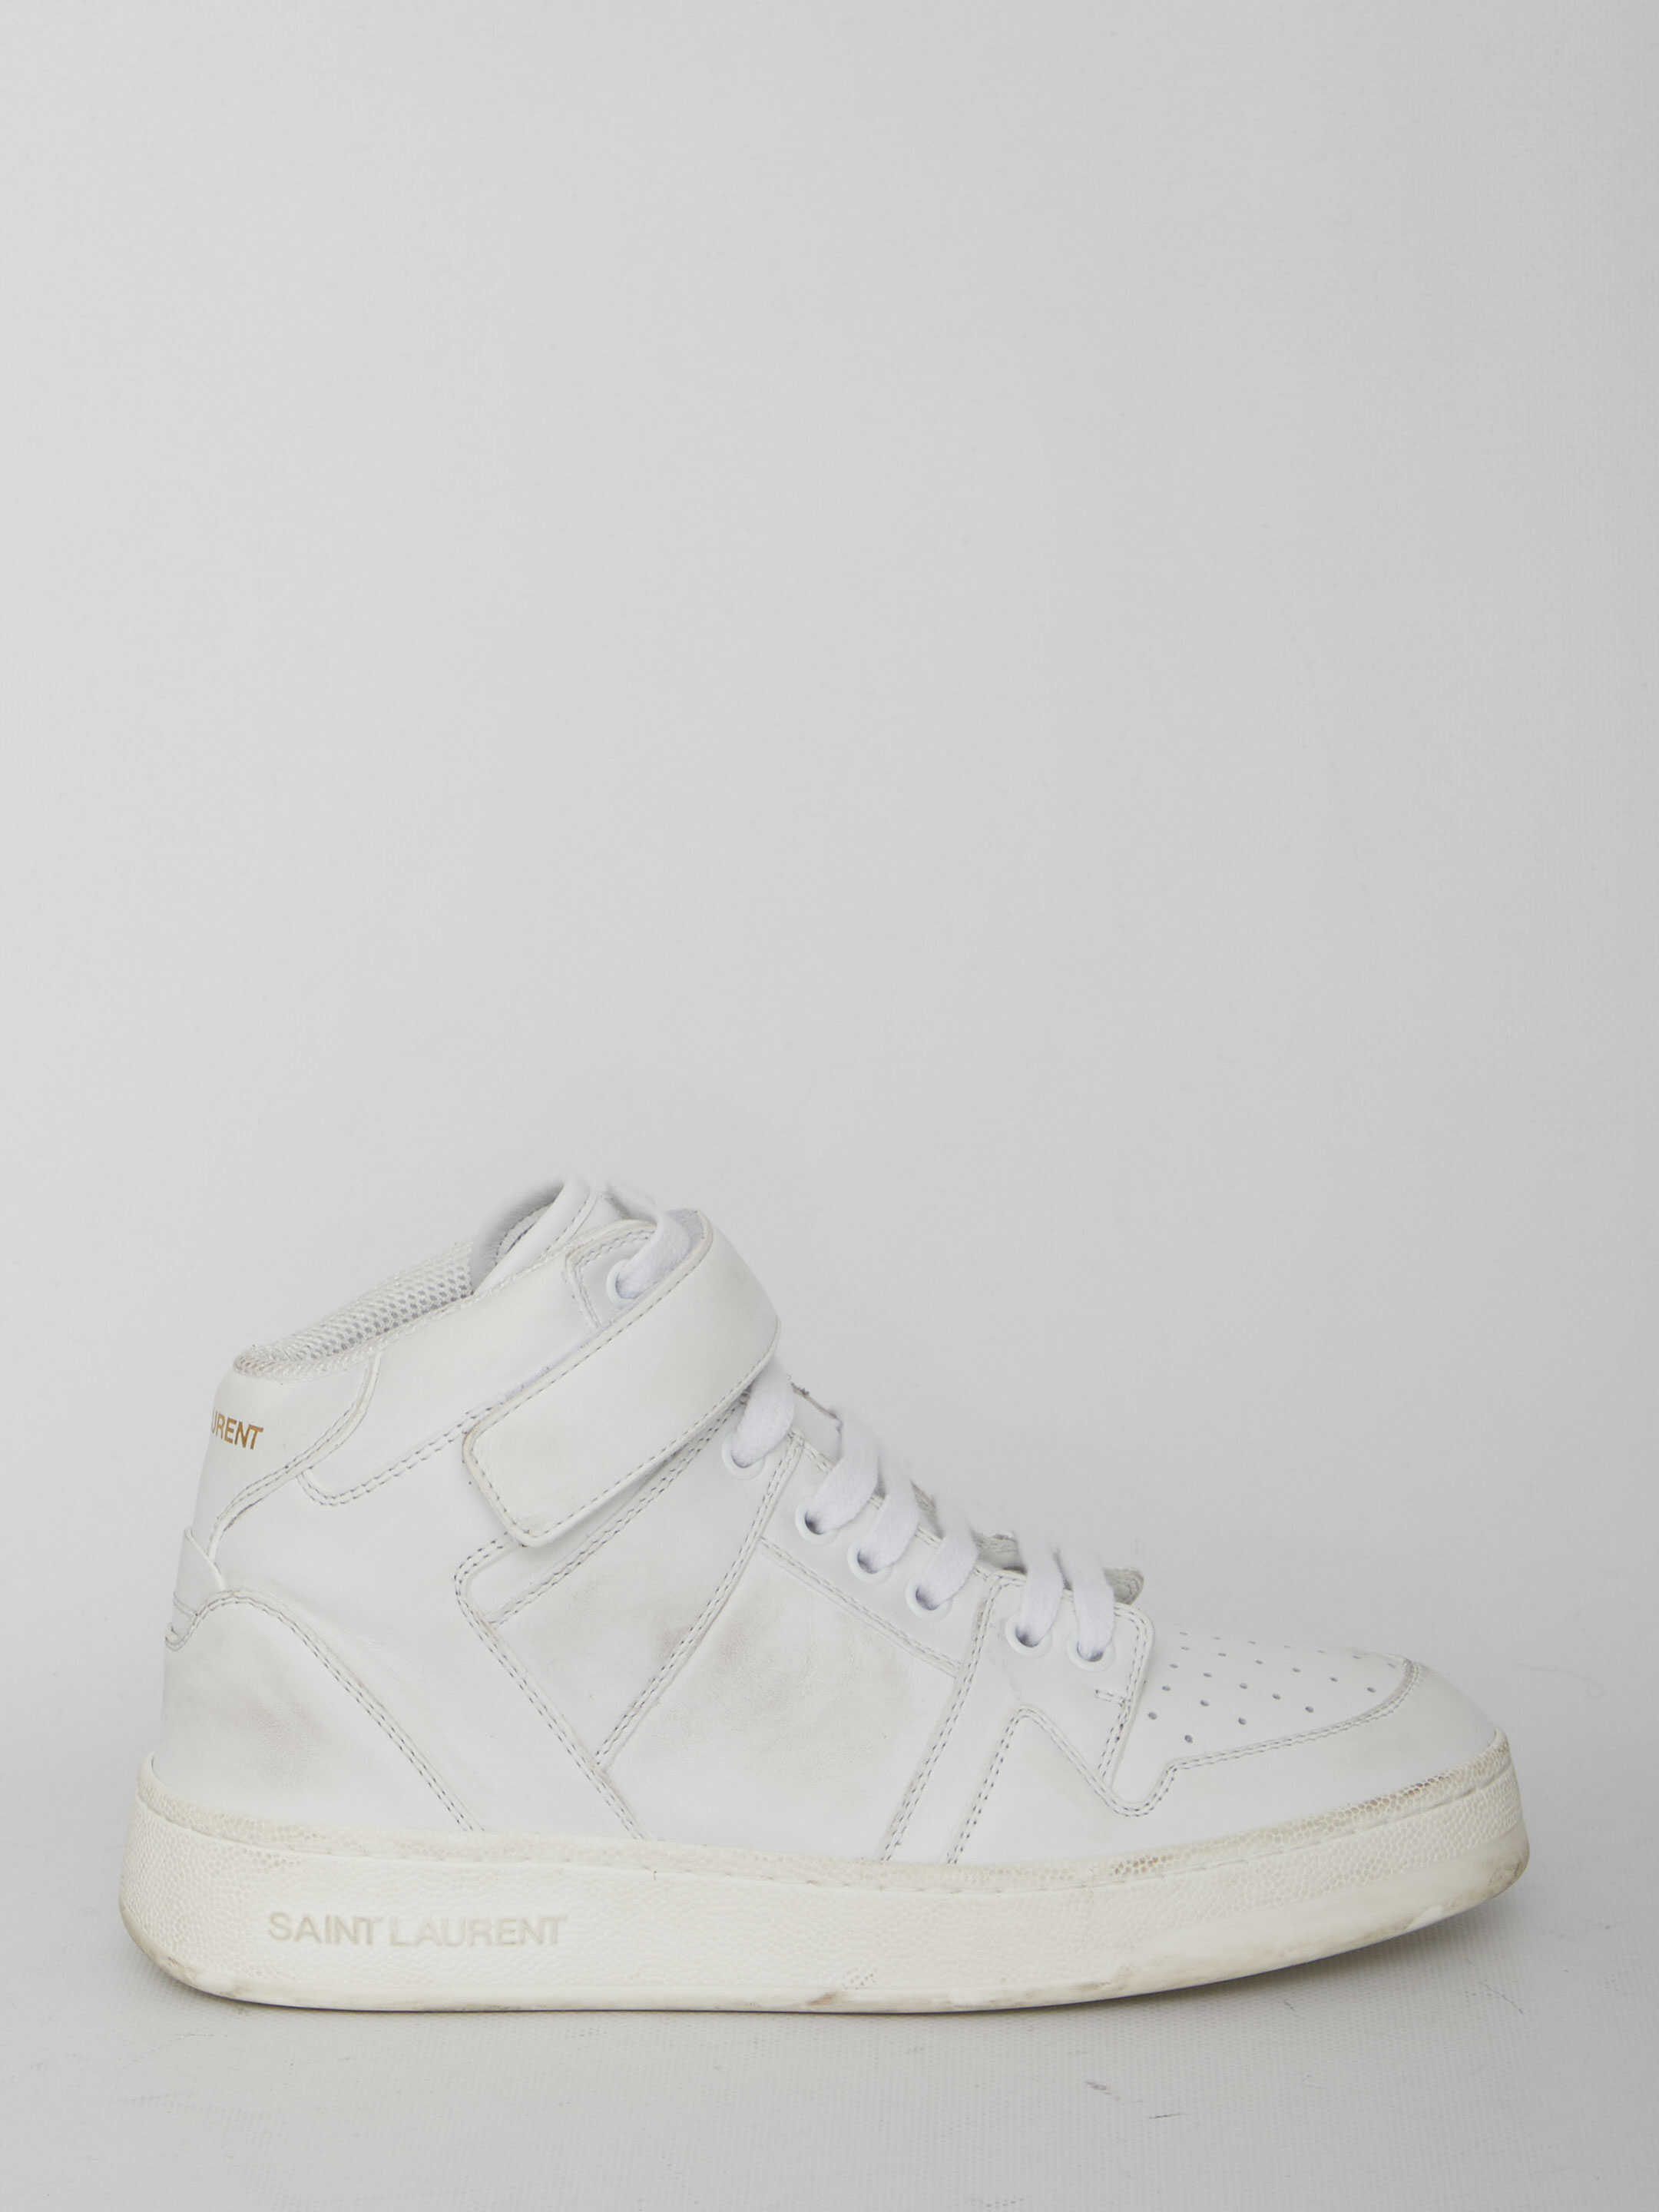 Saint Laurent Lax Sneakers In Washed-Out Effect Leather WHITE